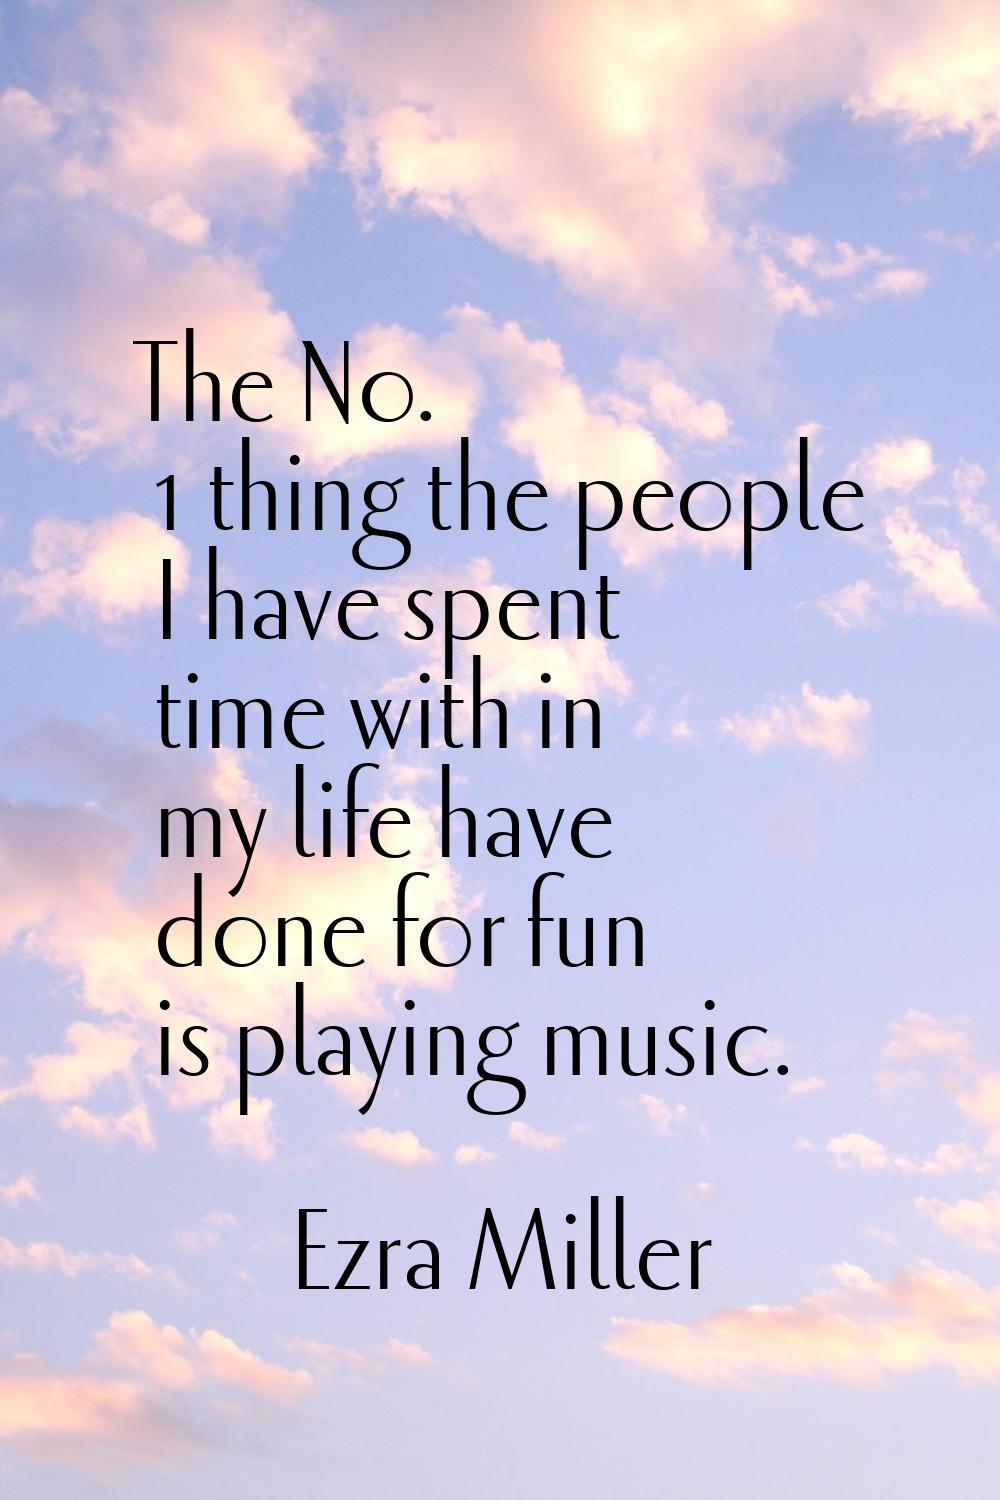 The No. 1 thing the people I have spent time with in my life have done for fun is playing music.